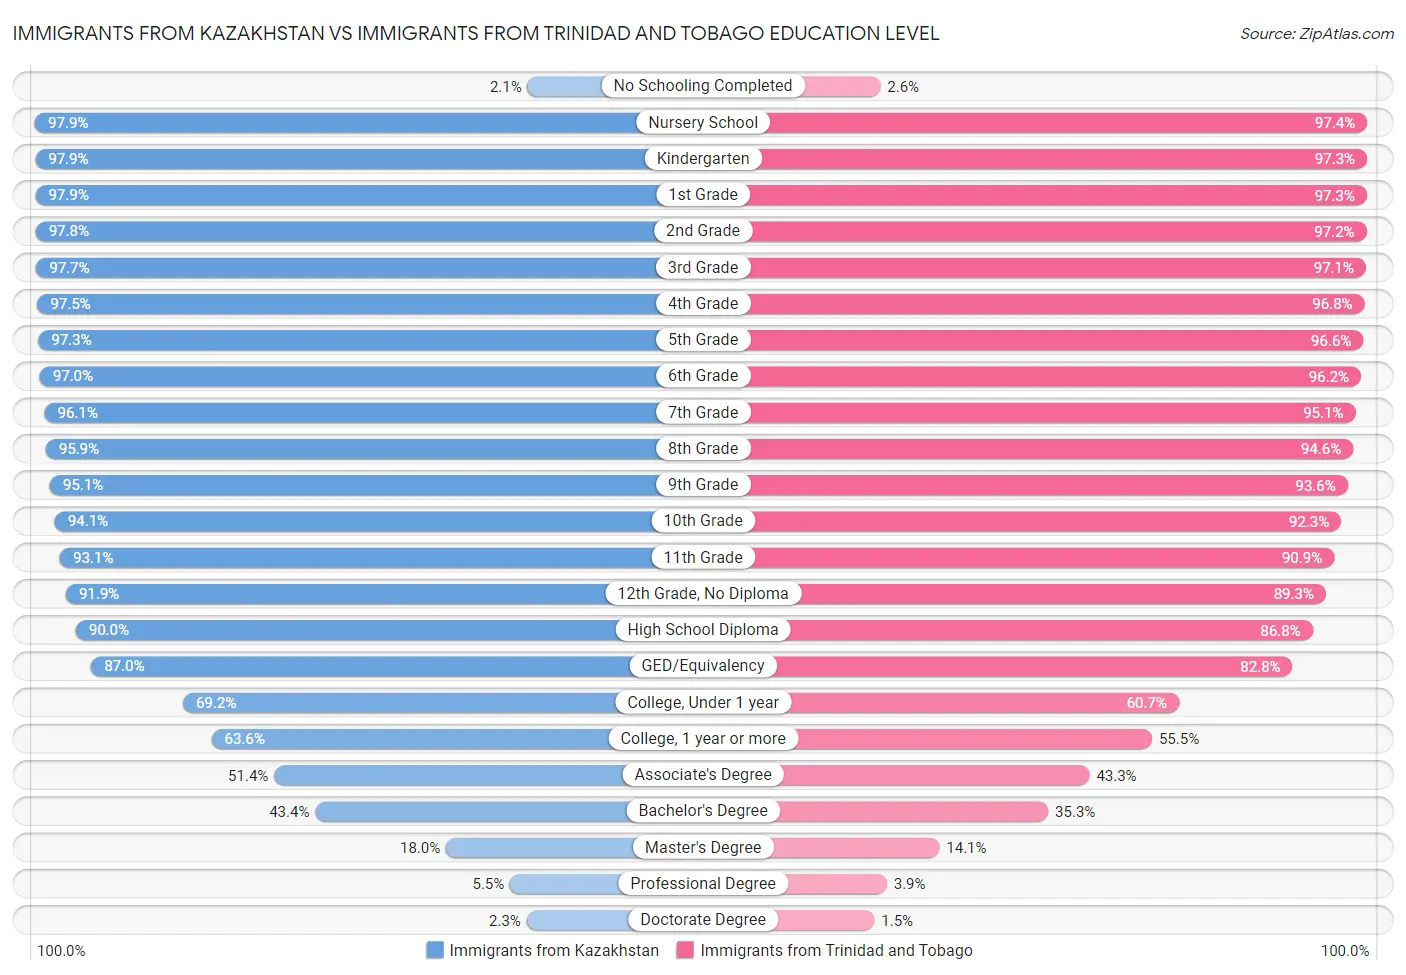 Immigrants from Kazakhstan vs Immigrants from Trinidad and Tobago Education Level